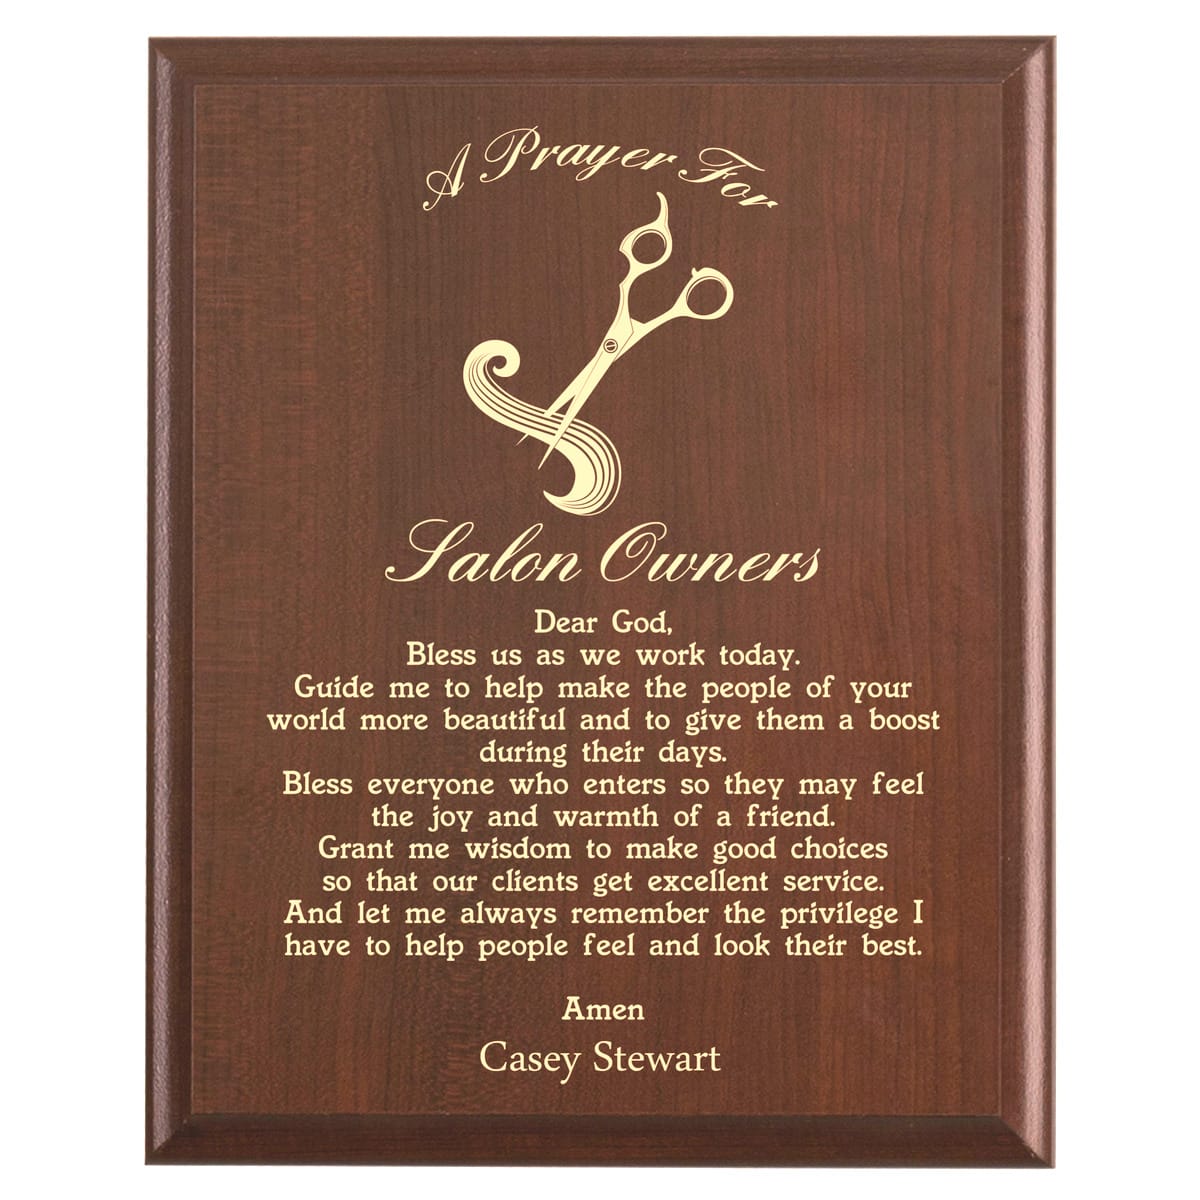 Plaque photo: Hair Salon Prayer Plaque design with free personalization. Wood style finish with customized text.